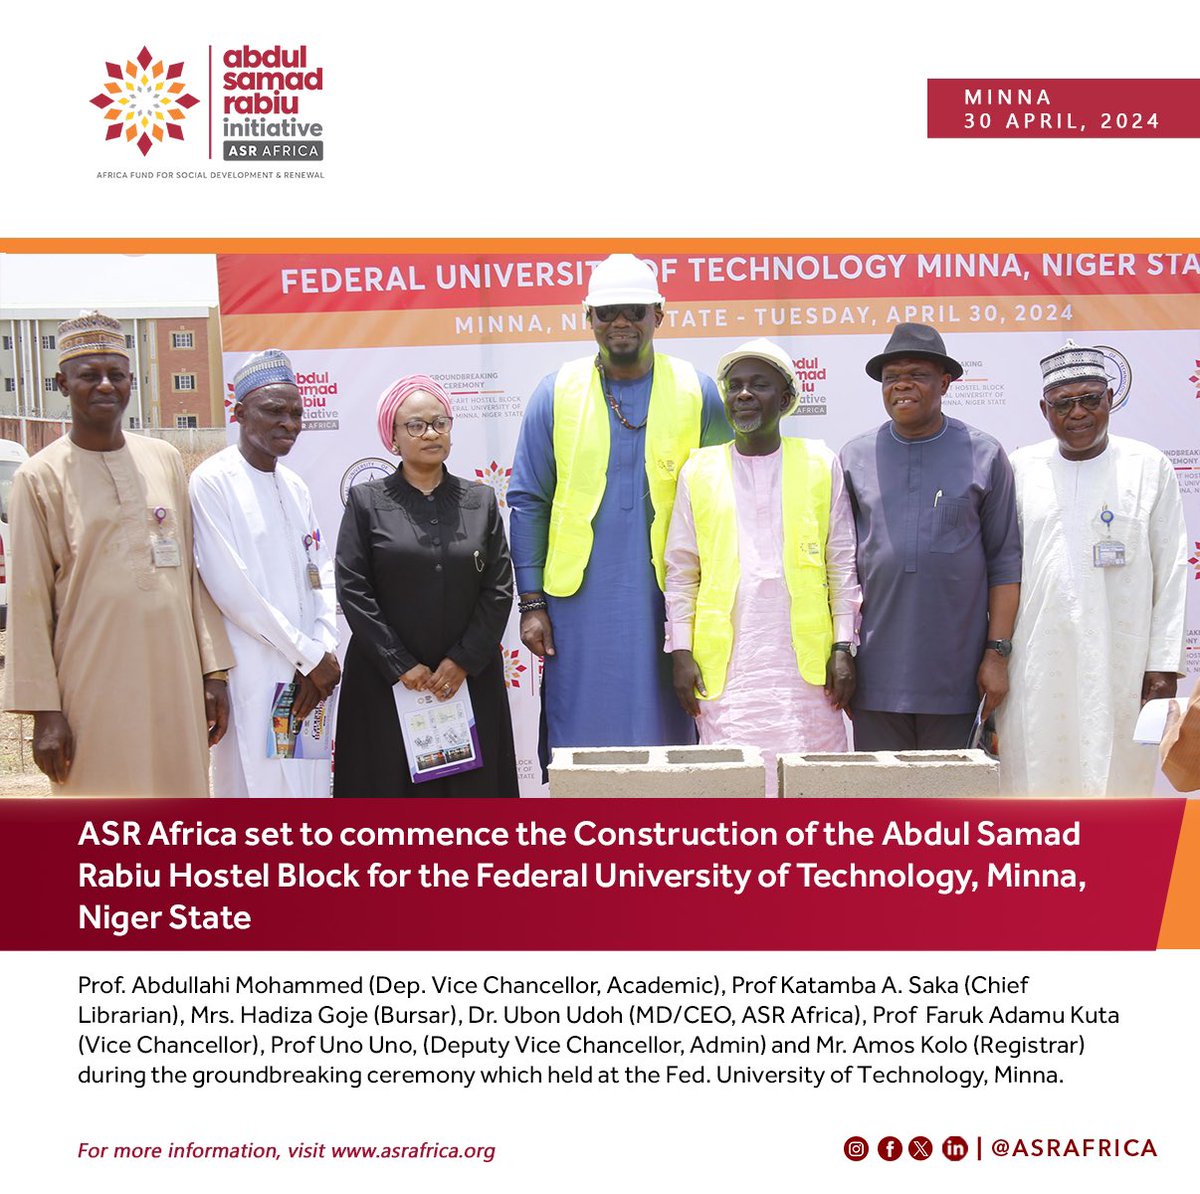 ASR Africa solidifies its dedication to advancing quality education in Nigeria with the groundbreaking of the N250 million Abdul Samad Rabiu Hostel Block at the Federal University of Technology, Minna. This project is funded through the ASR Africa's Tertiary Education Grant